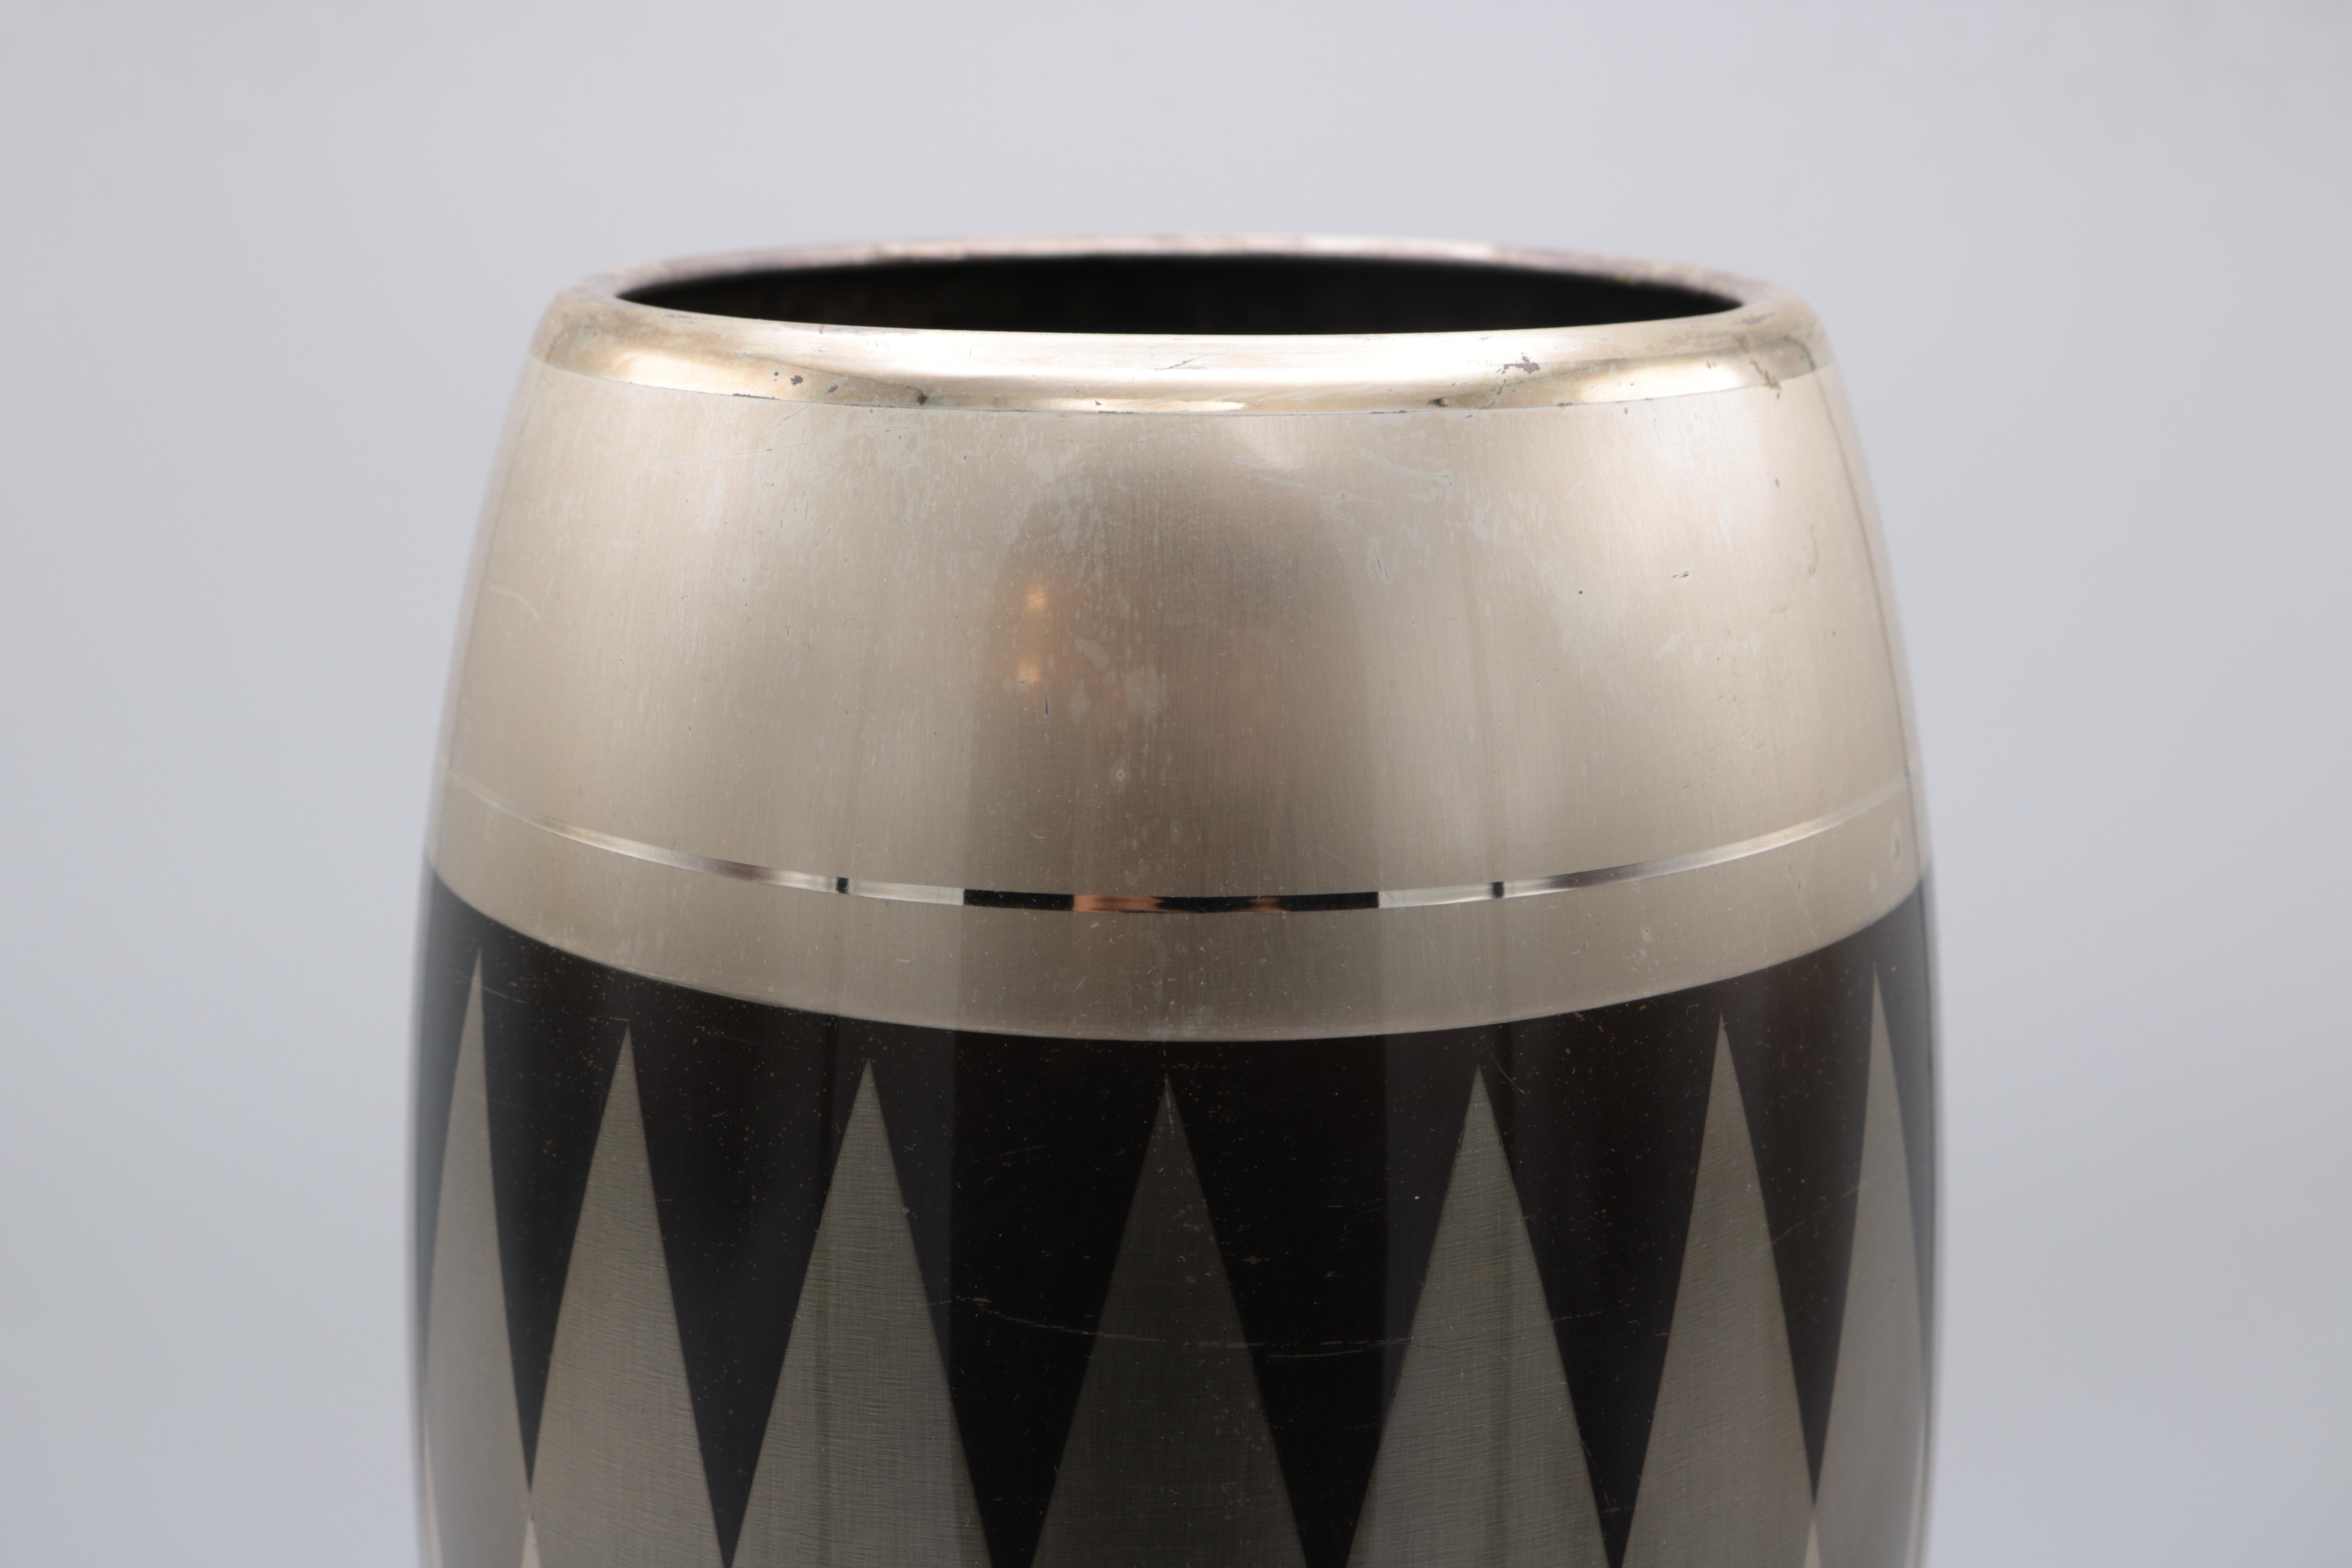 A WMF Art Deco mixed metal vase with geometric diamond patterns. 
Signed underneath : WMF.